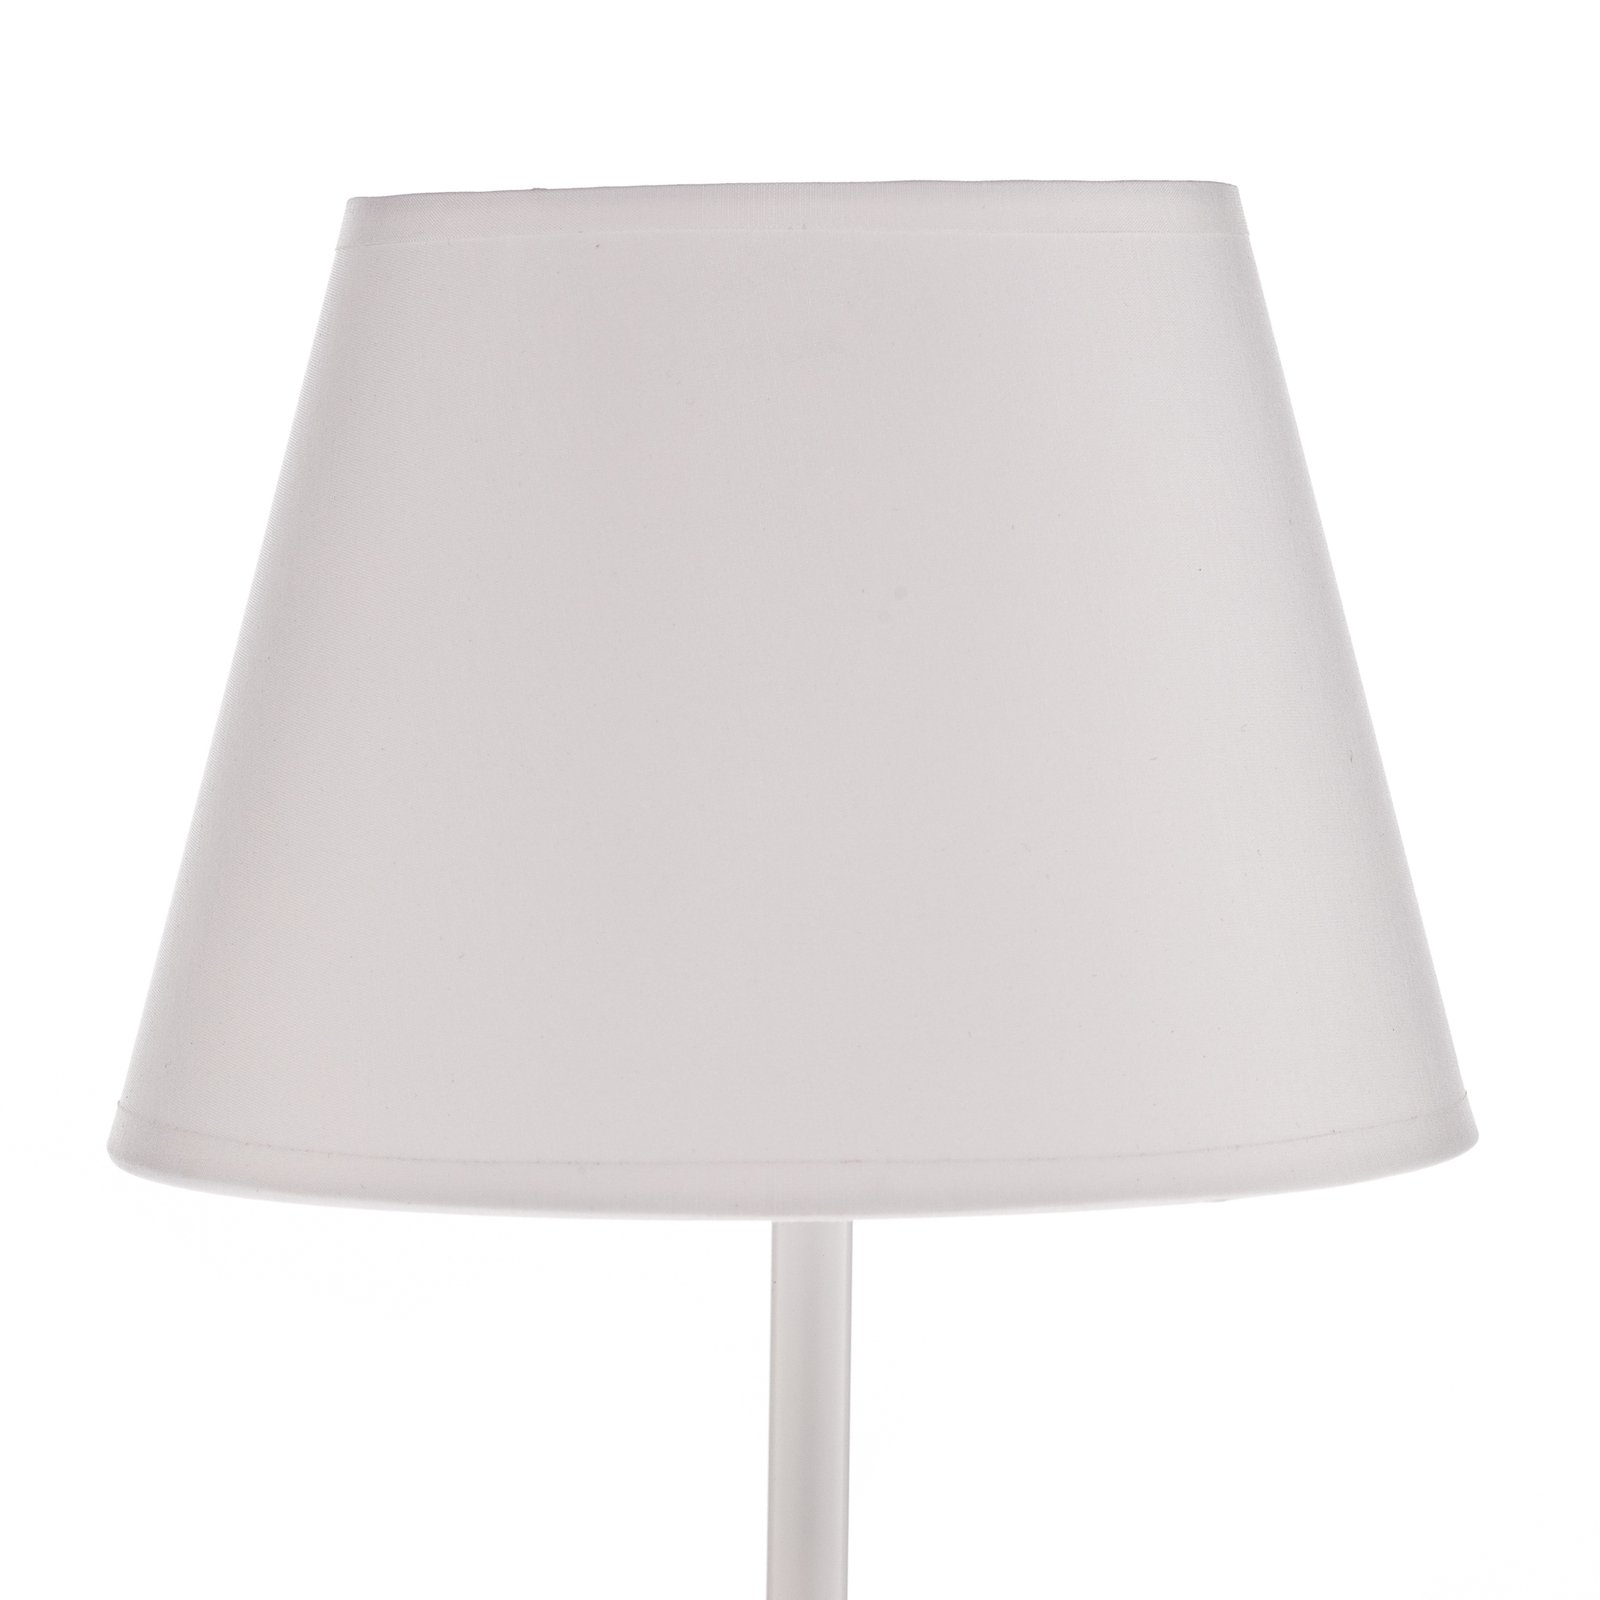 Soho table lamp, conical height 33 cm, white